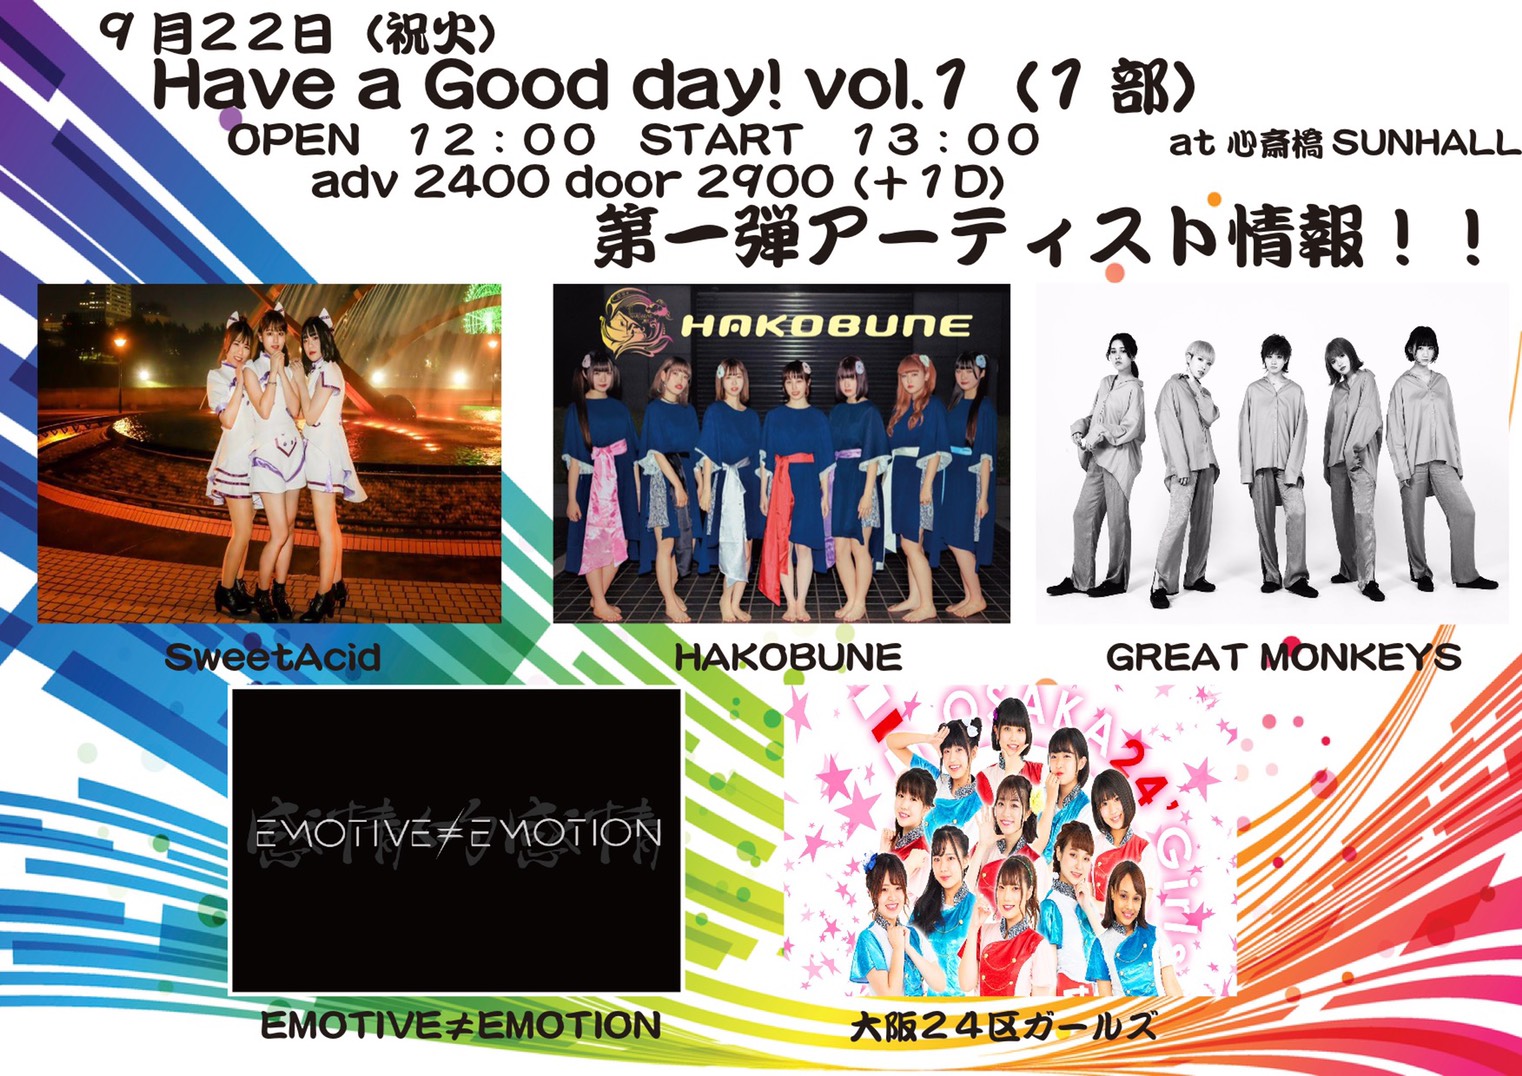 Have a Good Day！　vol.1